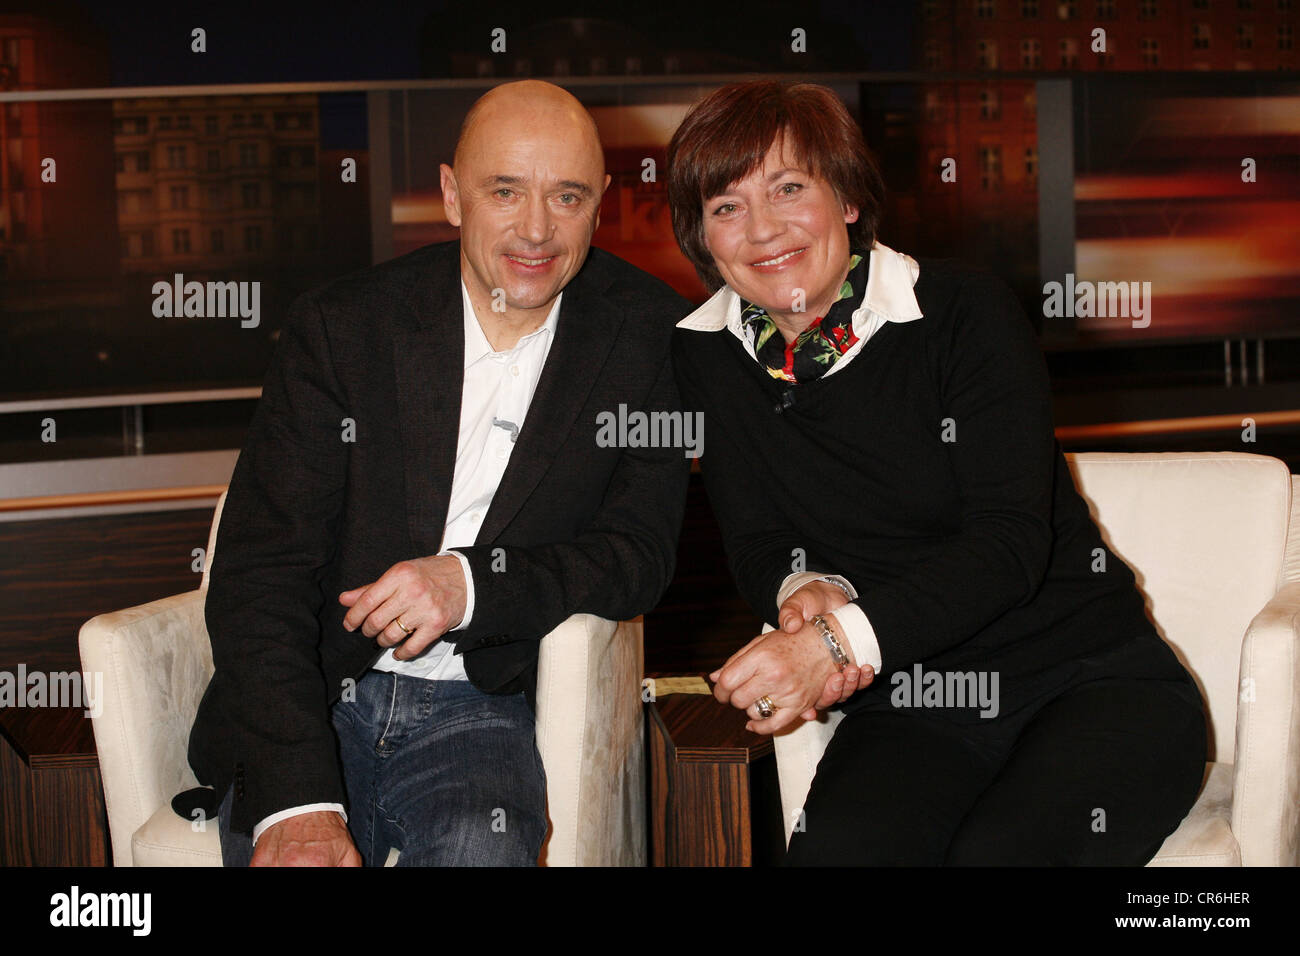 Neureuther, Christian, * 28.4.1949, German athlete (Ski Alpin), half length, with his wife Rosi Mittermaier, guest at tv show 'Johannes B. Kerner', Hamburg, 6.3.2008, Stock Photo